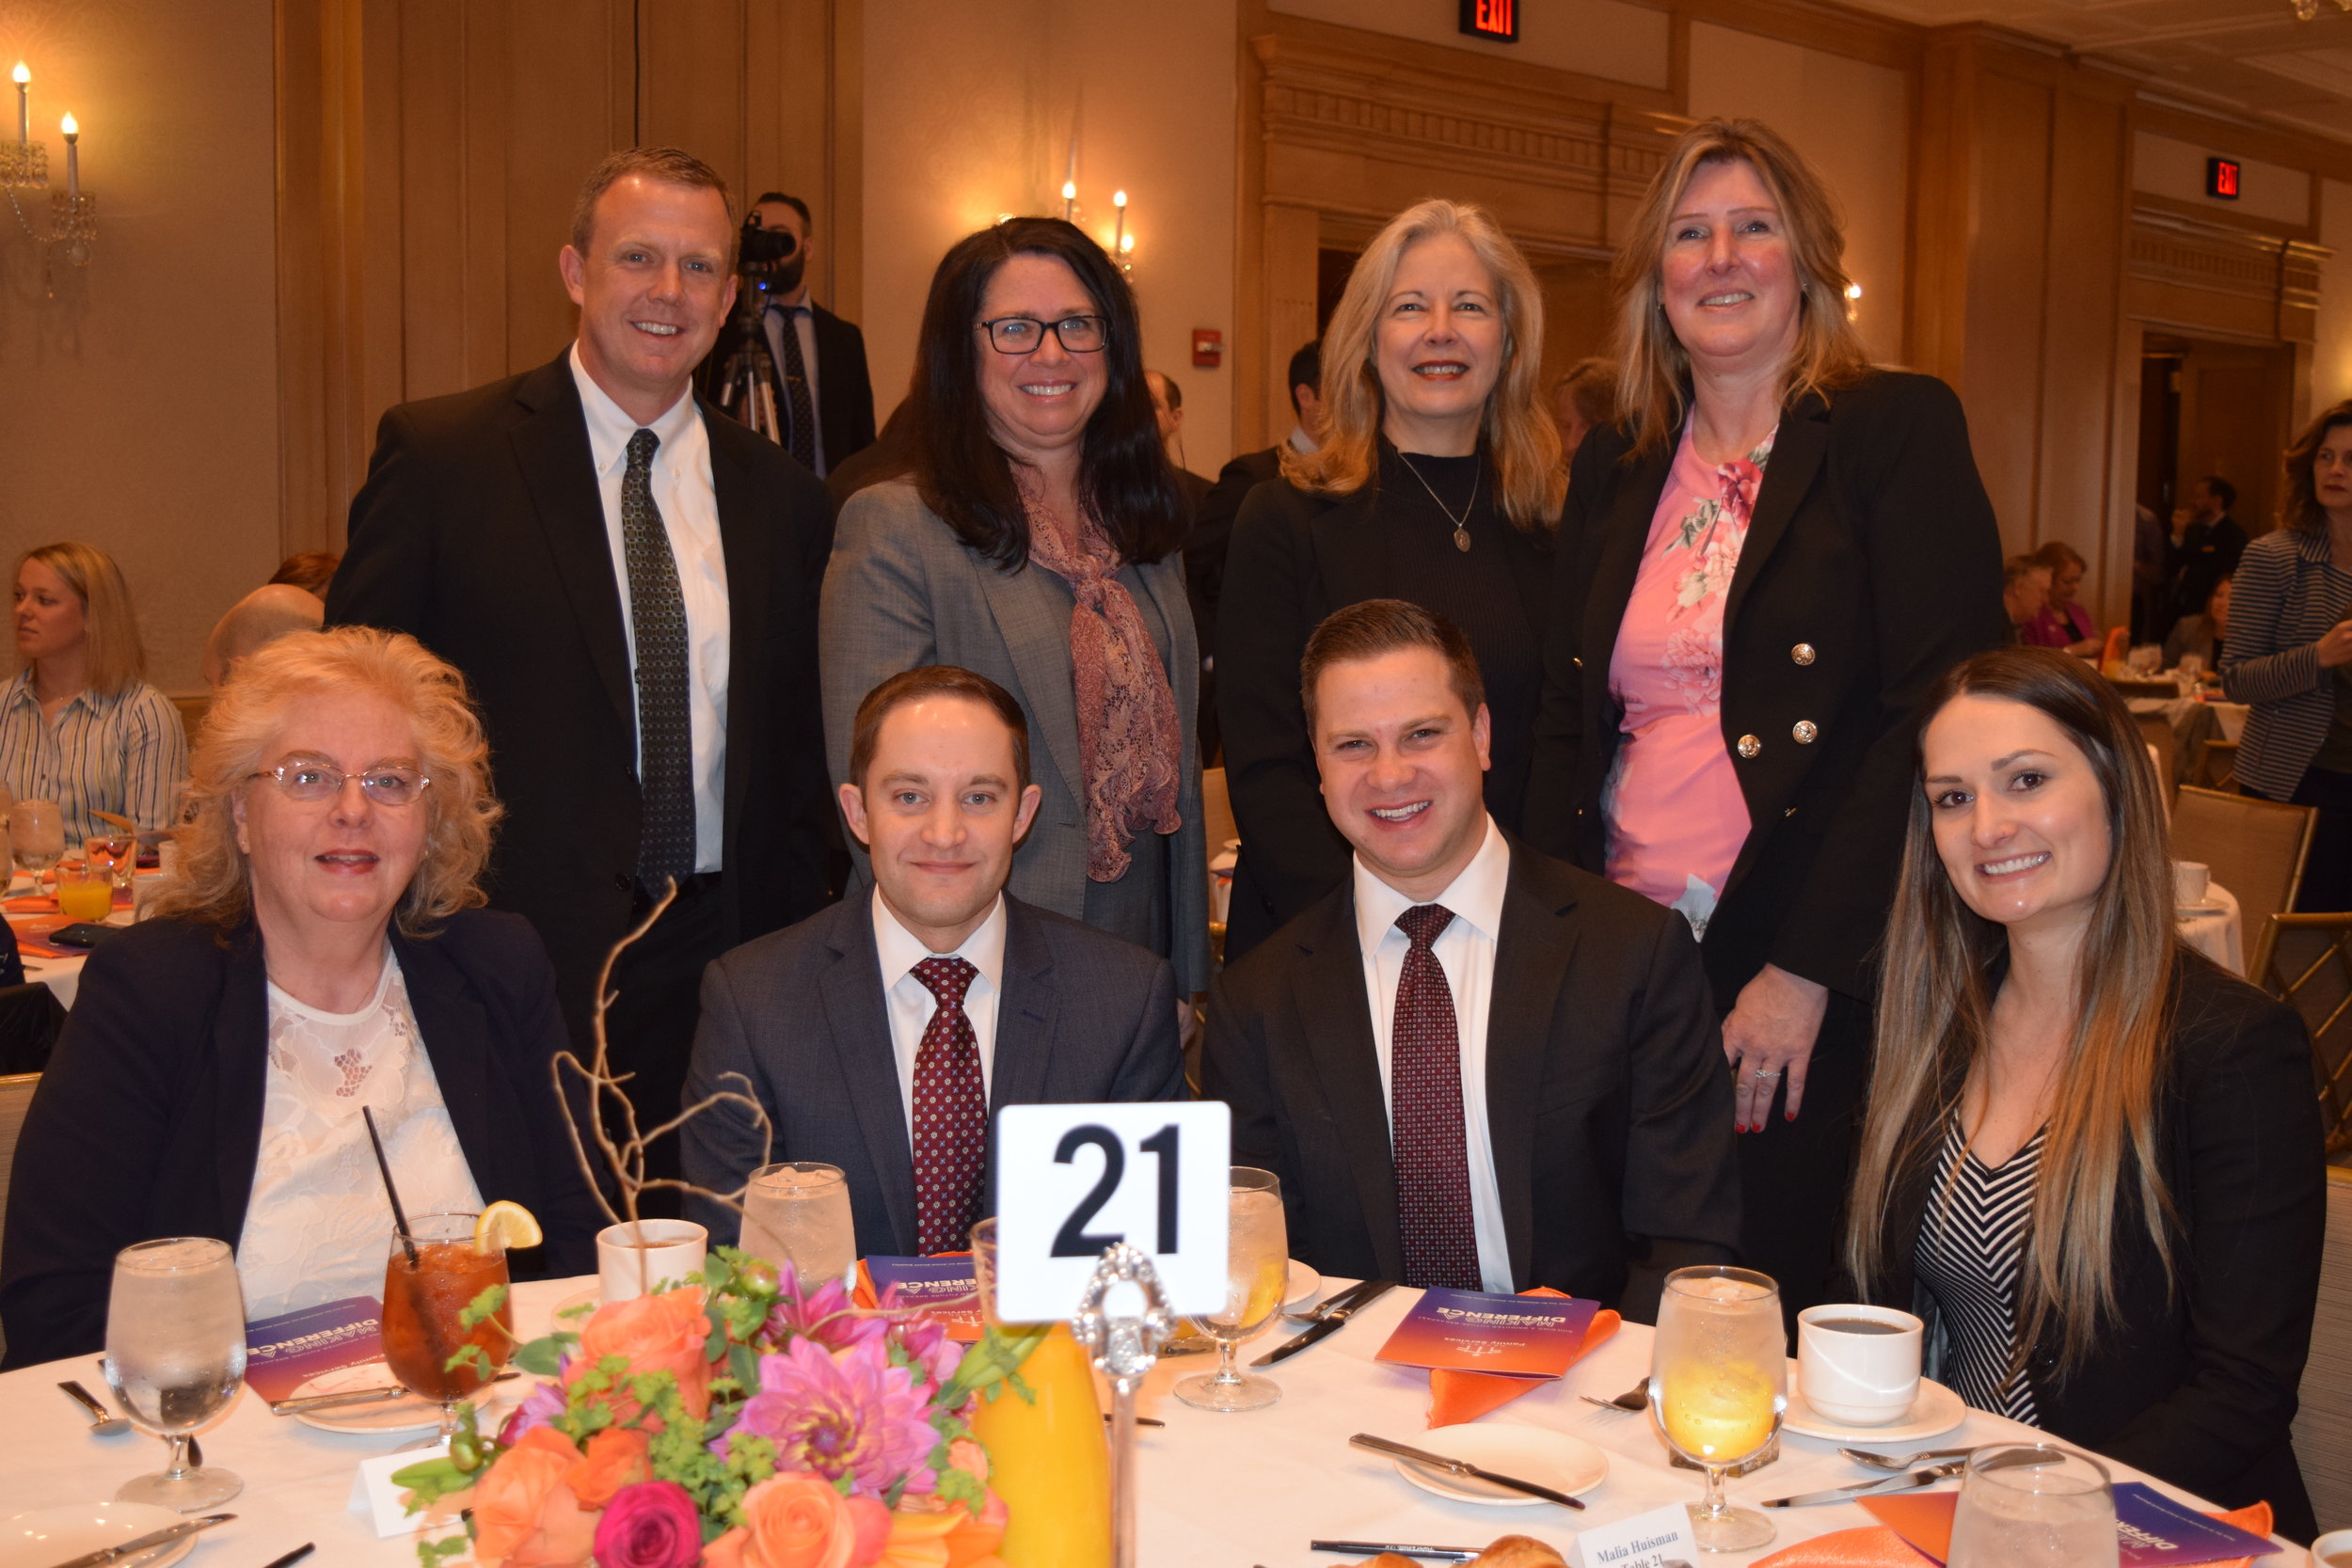 Representatives of breakfast sponsors Penske, including board member J.D. Carlson (top row, left), and Deloitte joined us at the event.